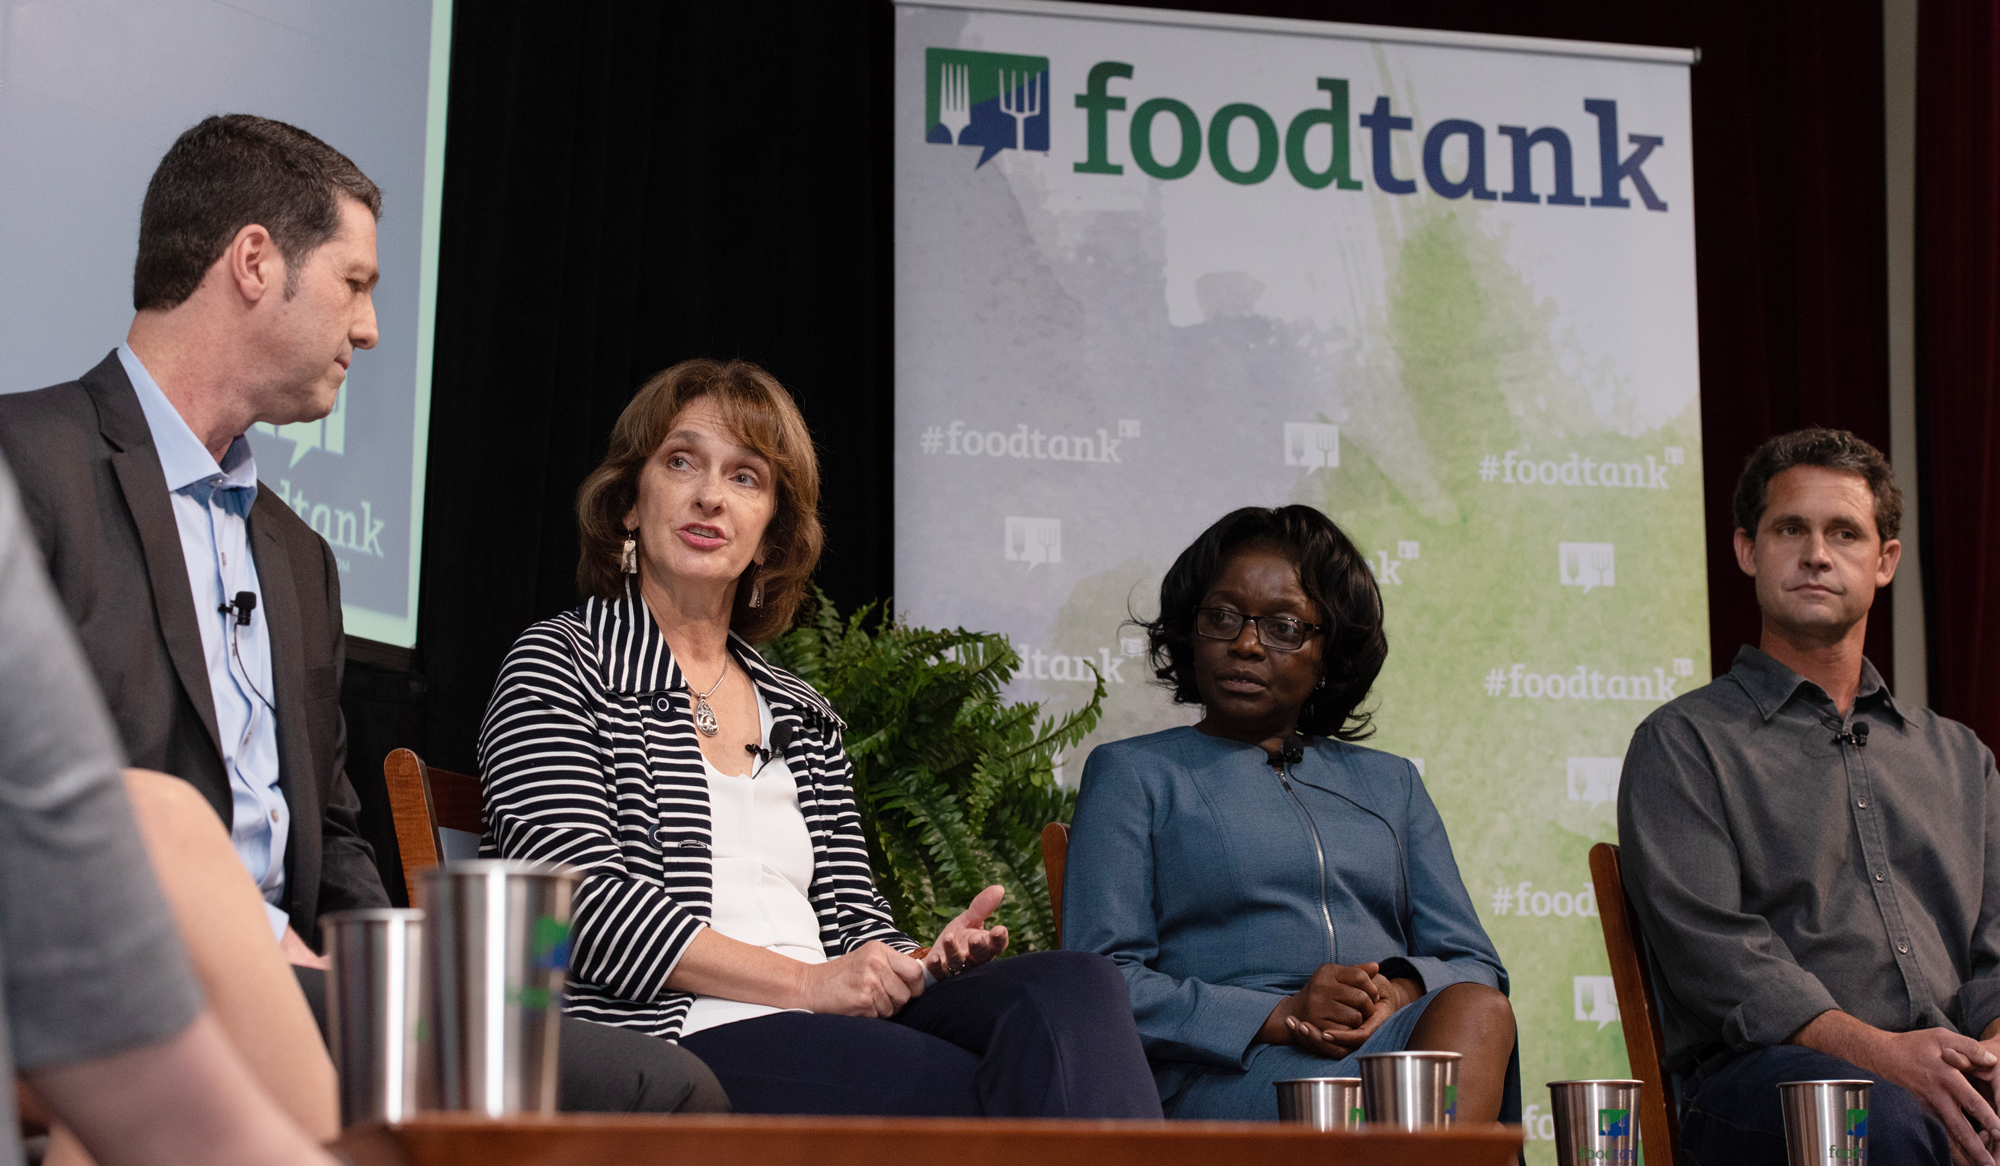 Beth Mitcham speaking on conference stage, next to Jane Ambuko, with two panelists listening, "foodtank" visible in background banner